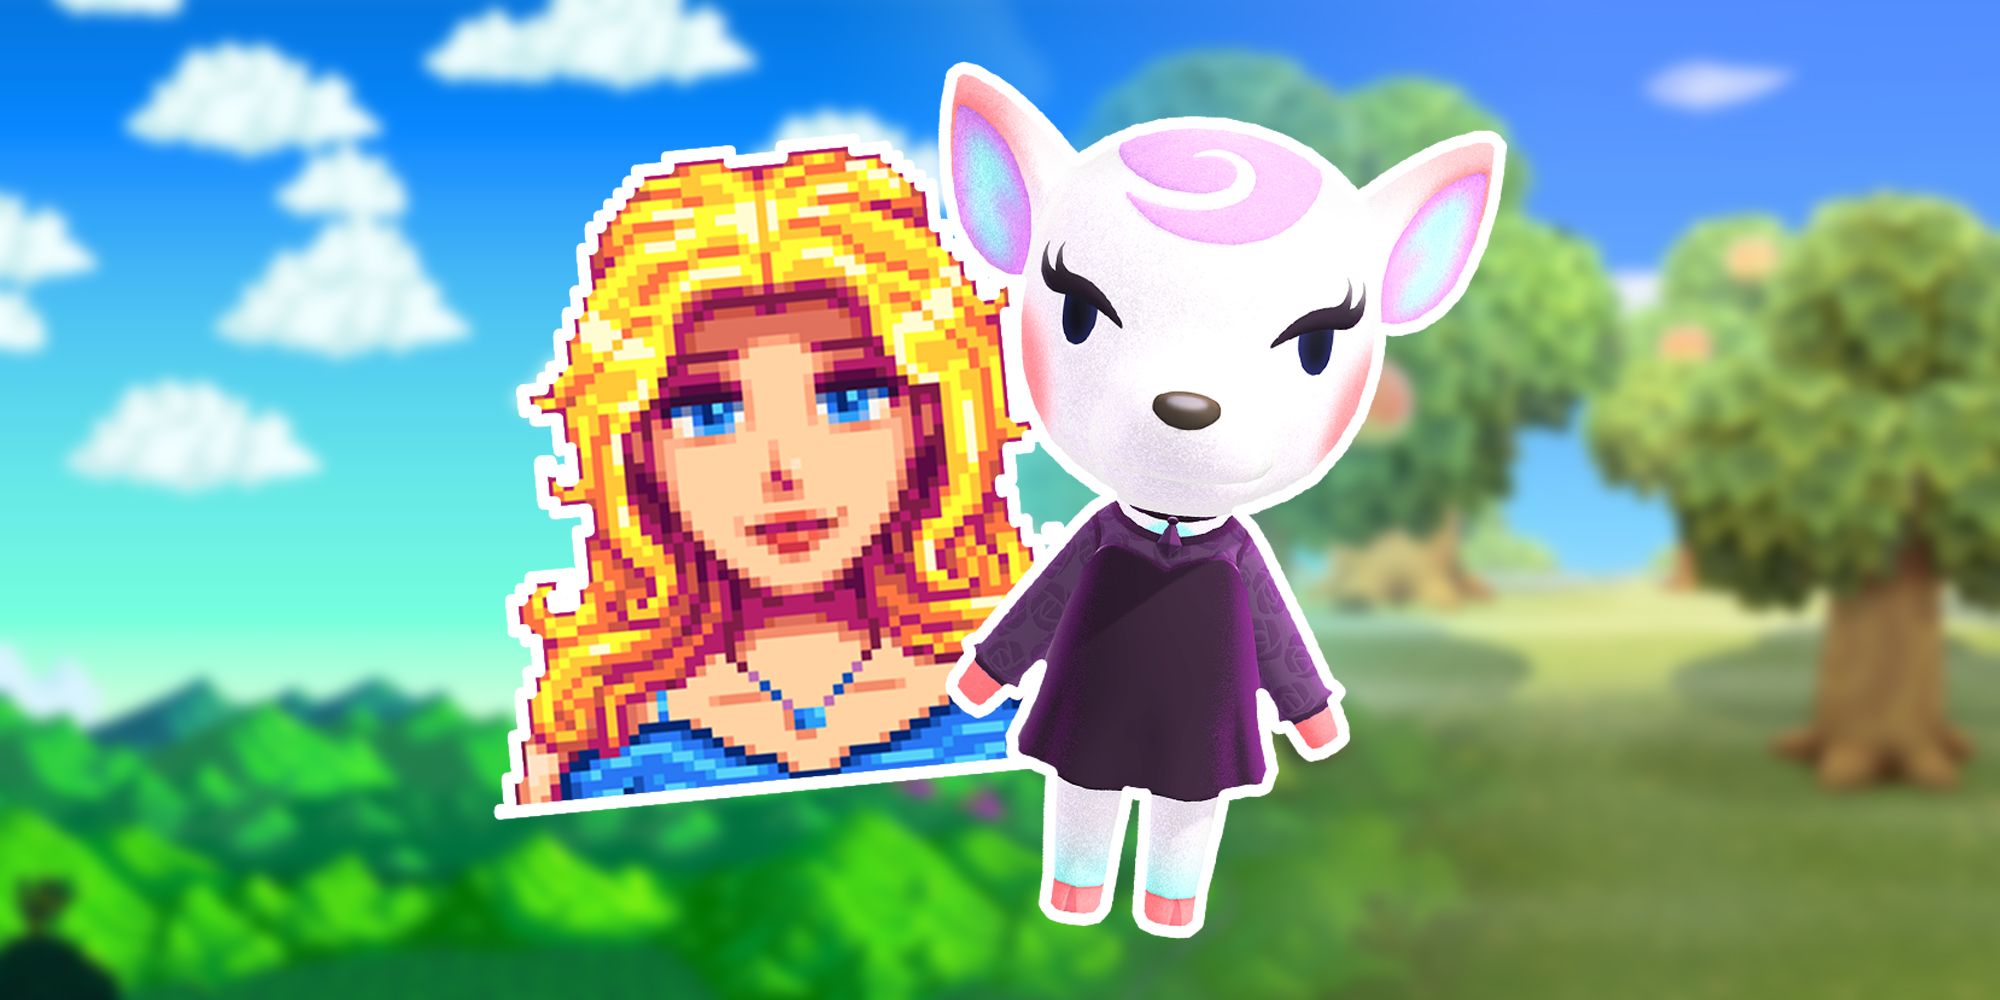 Haley from Stardew Valley and Diana from Animal Crossing on background of Stardew Valley landscape and the New Horizons island.